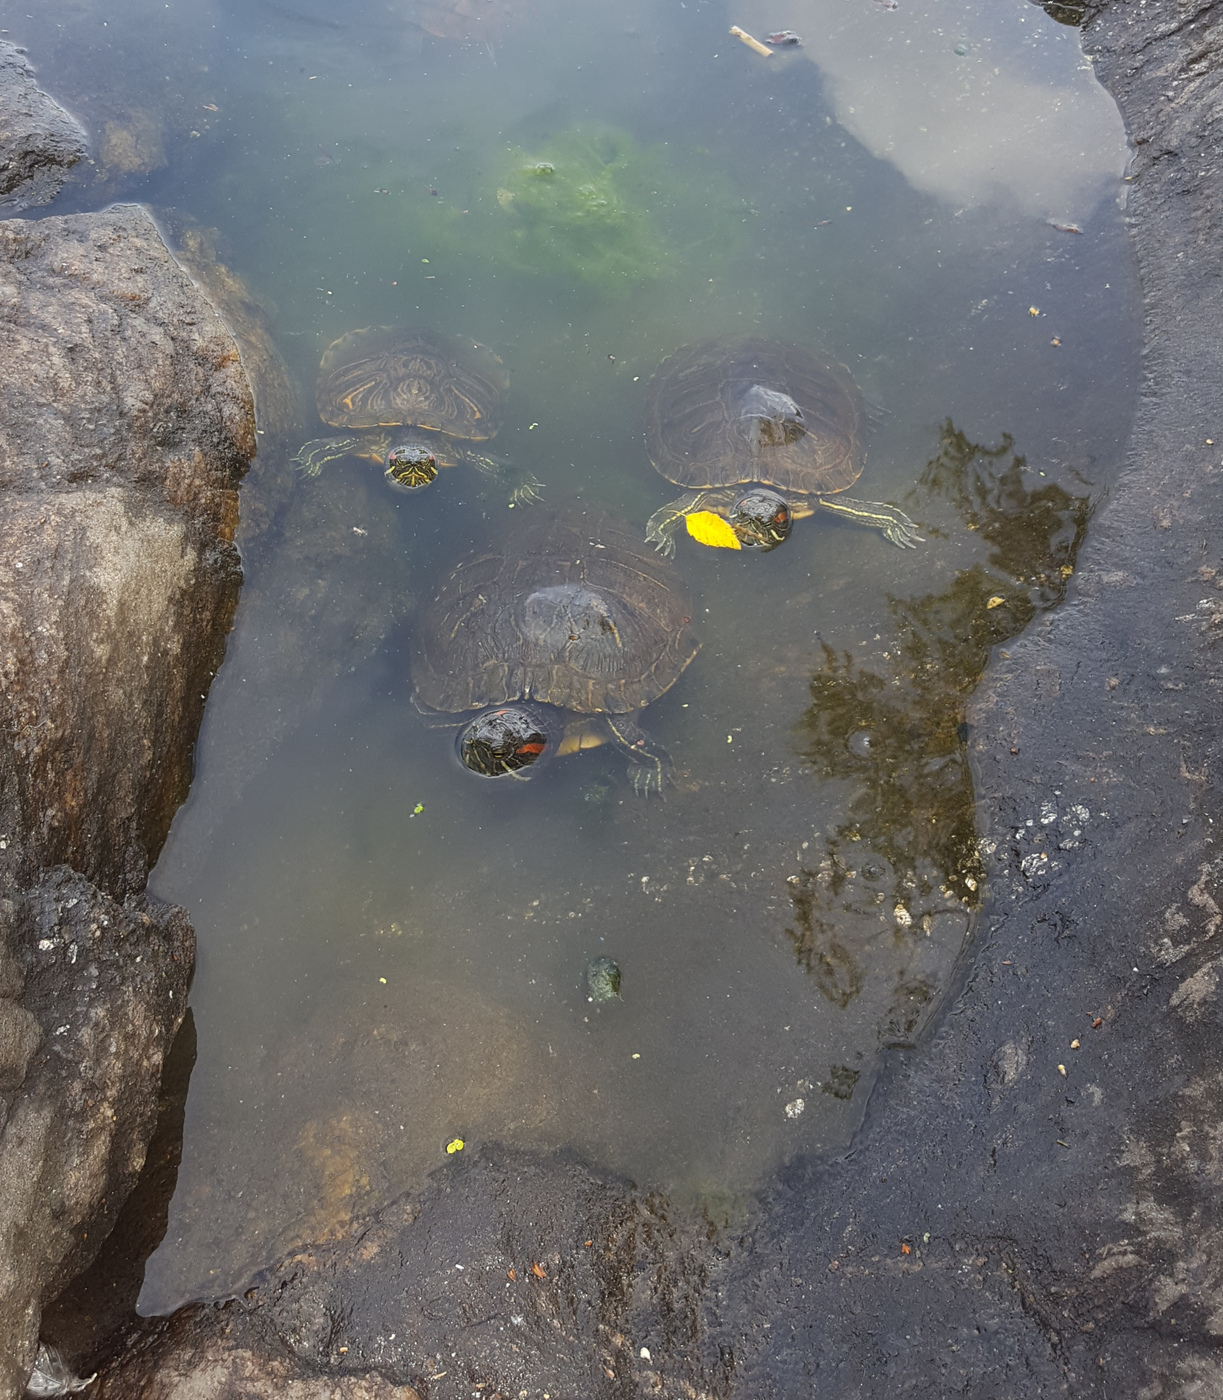 Turtles in Turtle Pond in Central Park